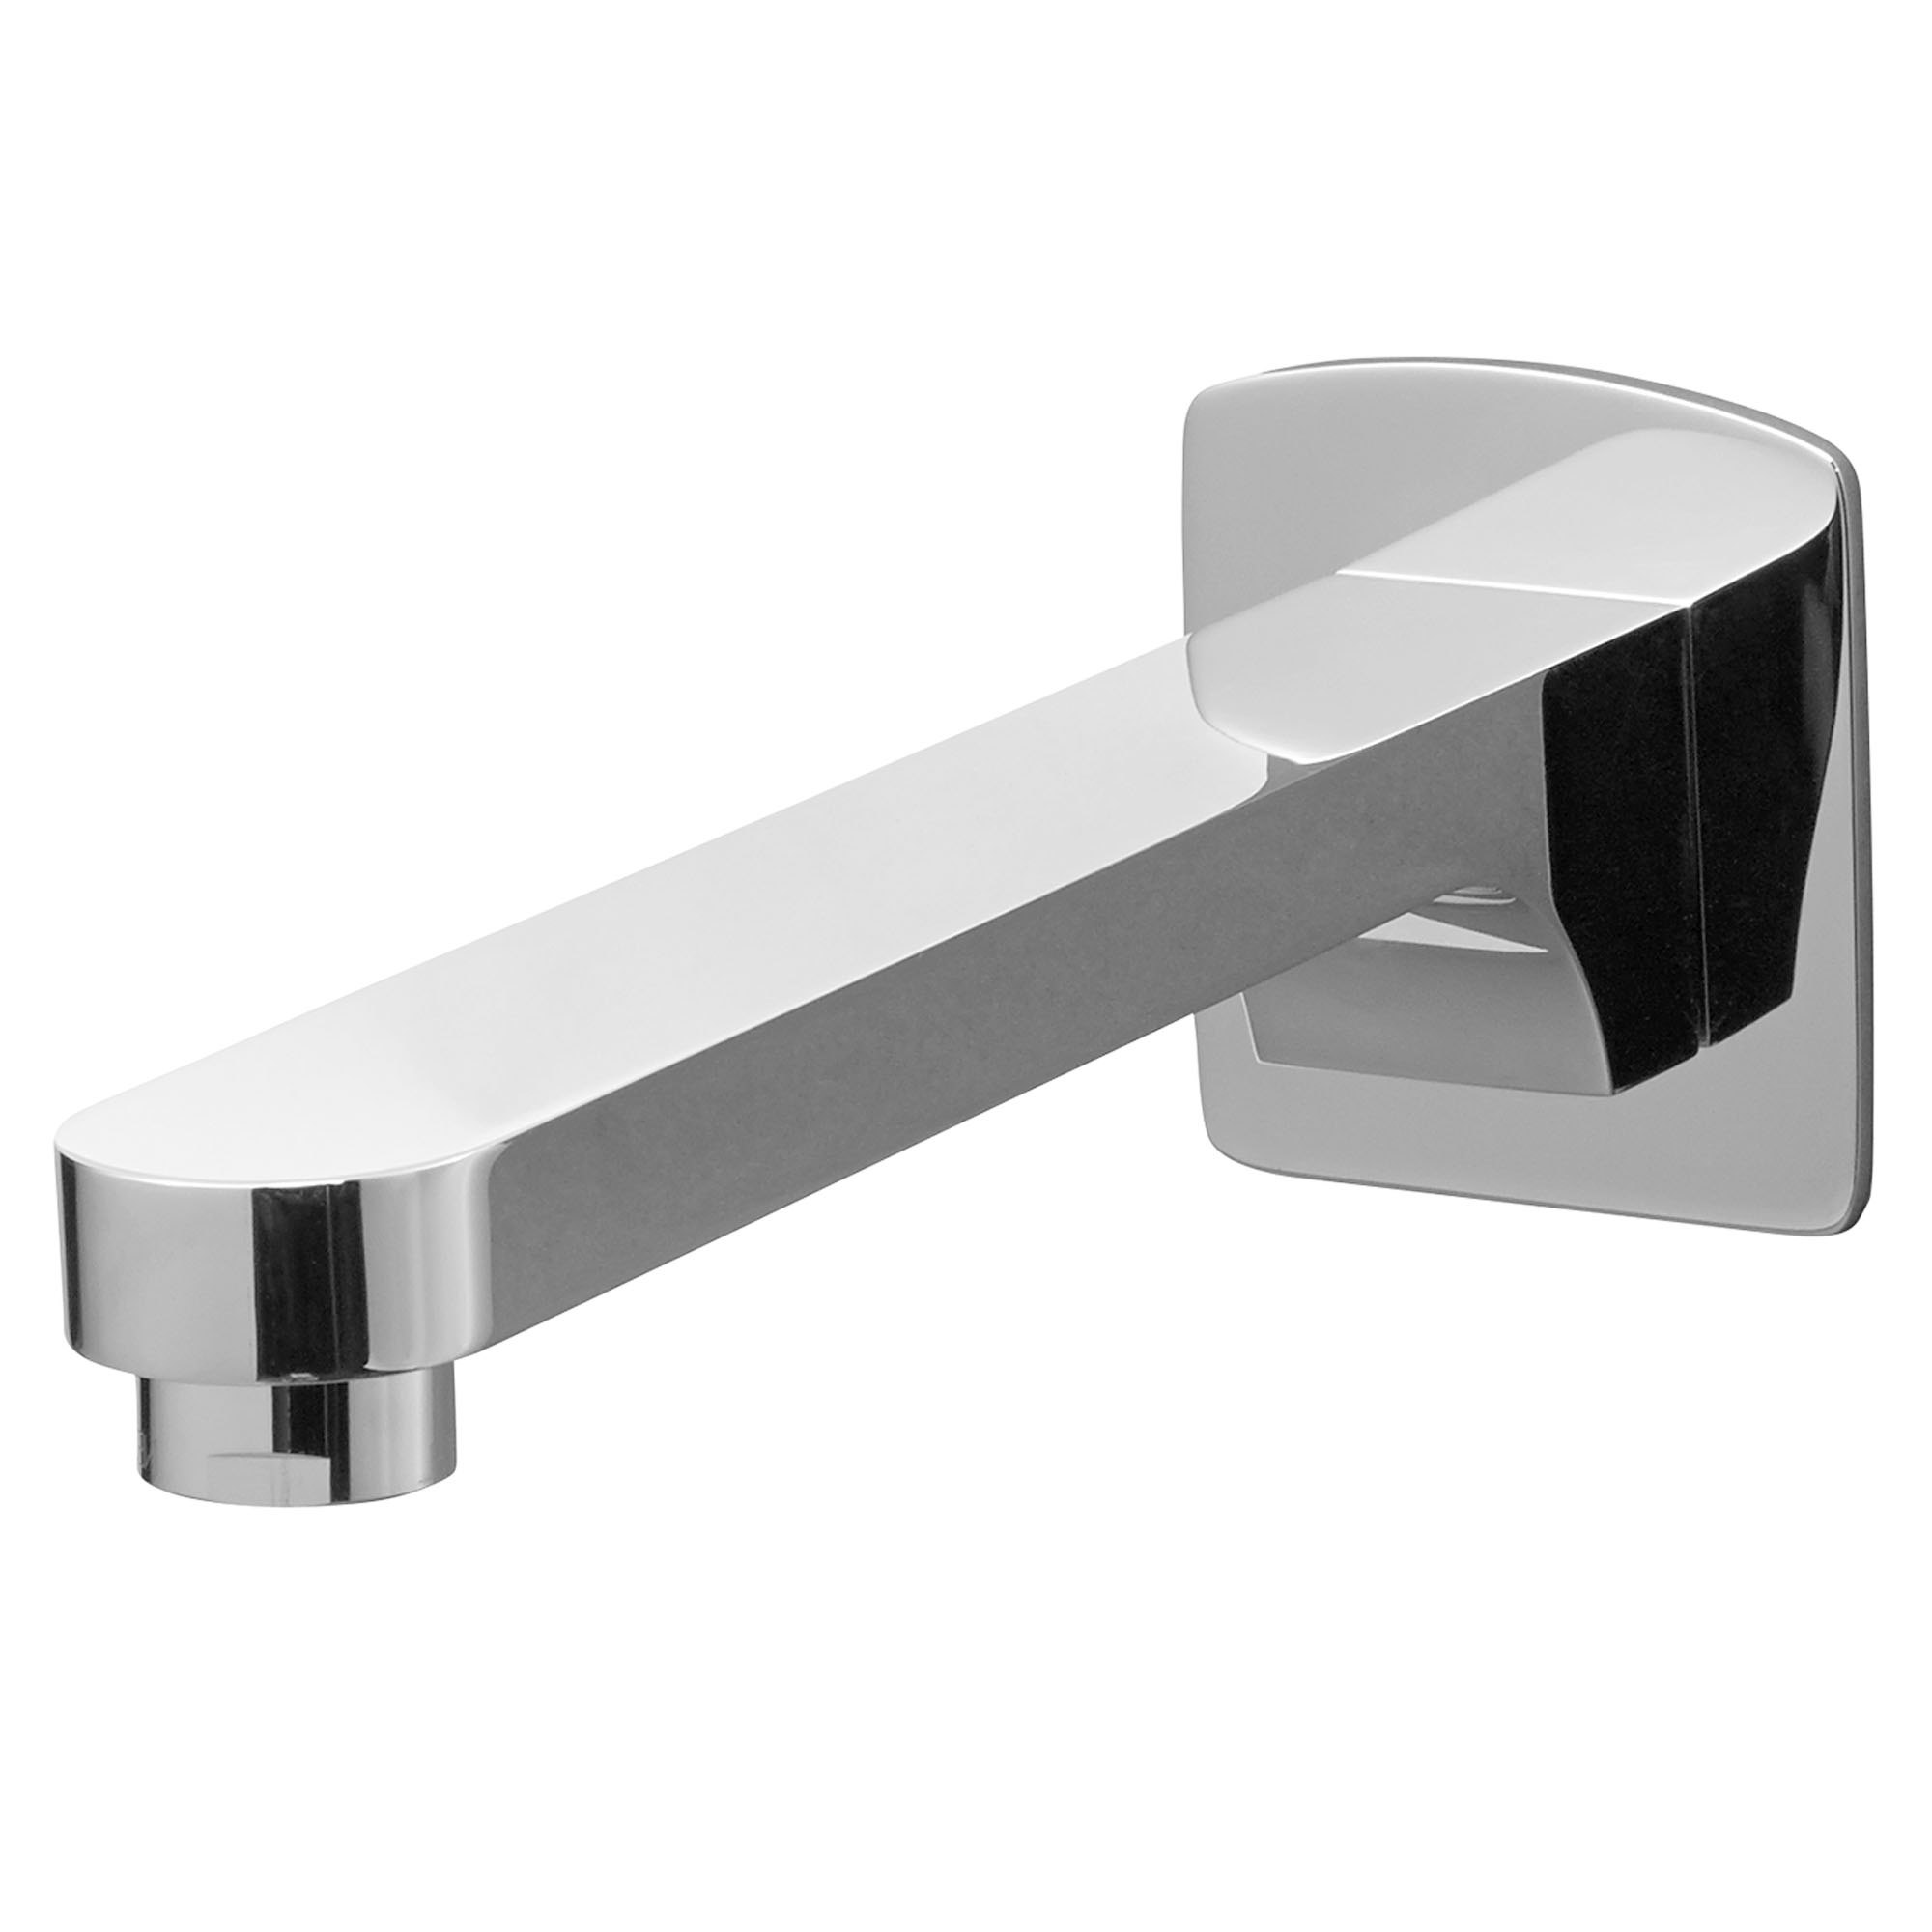 Equility Wall Mount Bathtub Spout